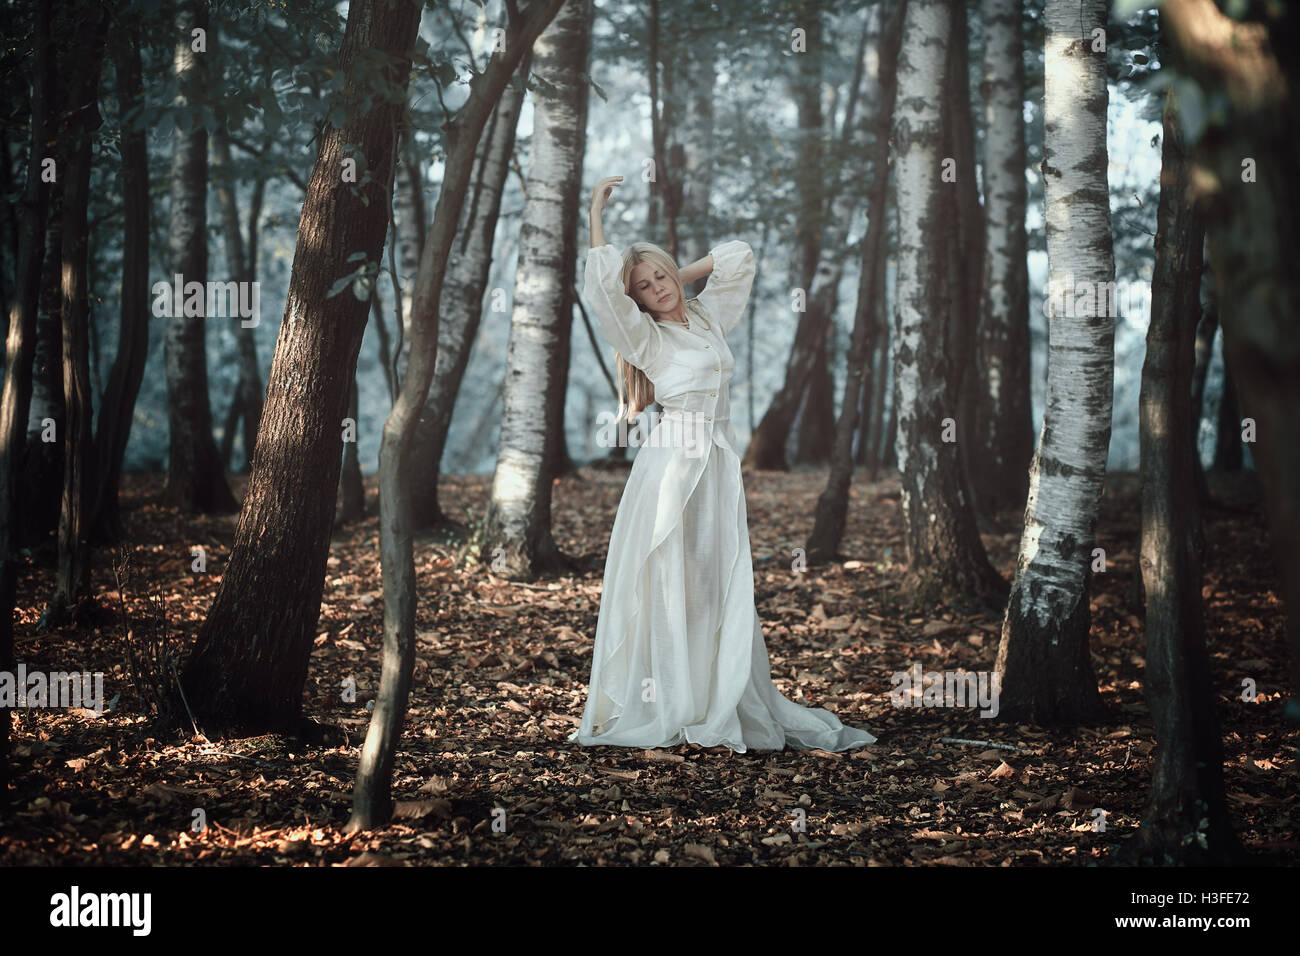 Beautiful woman dancing in ethereal forest . Fantasy and surreal Stock Photo